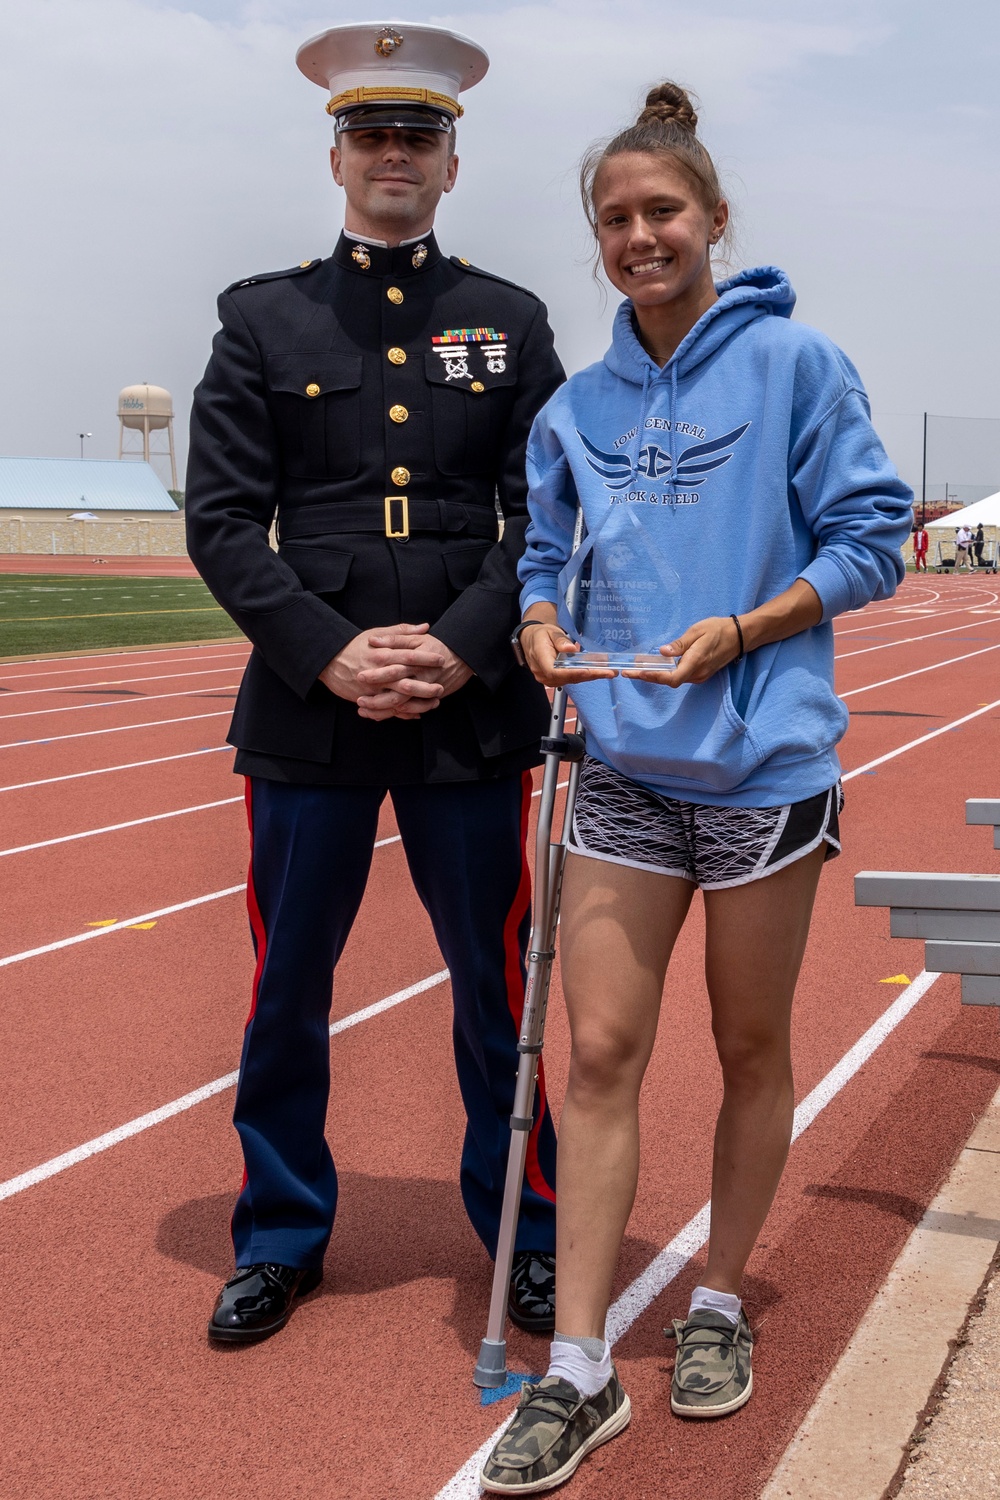 Marine Corps Recruiting Command Presents Award at the NJCAA Outdoor Track and Field National Championships